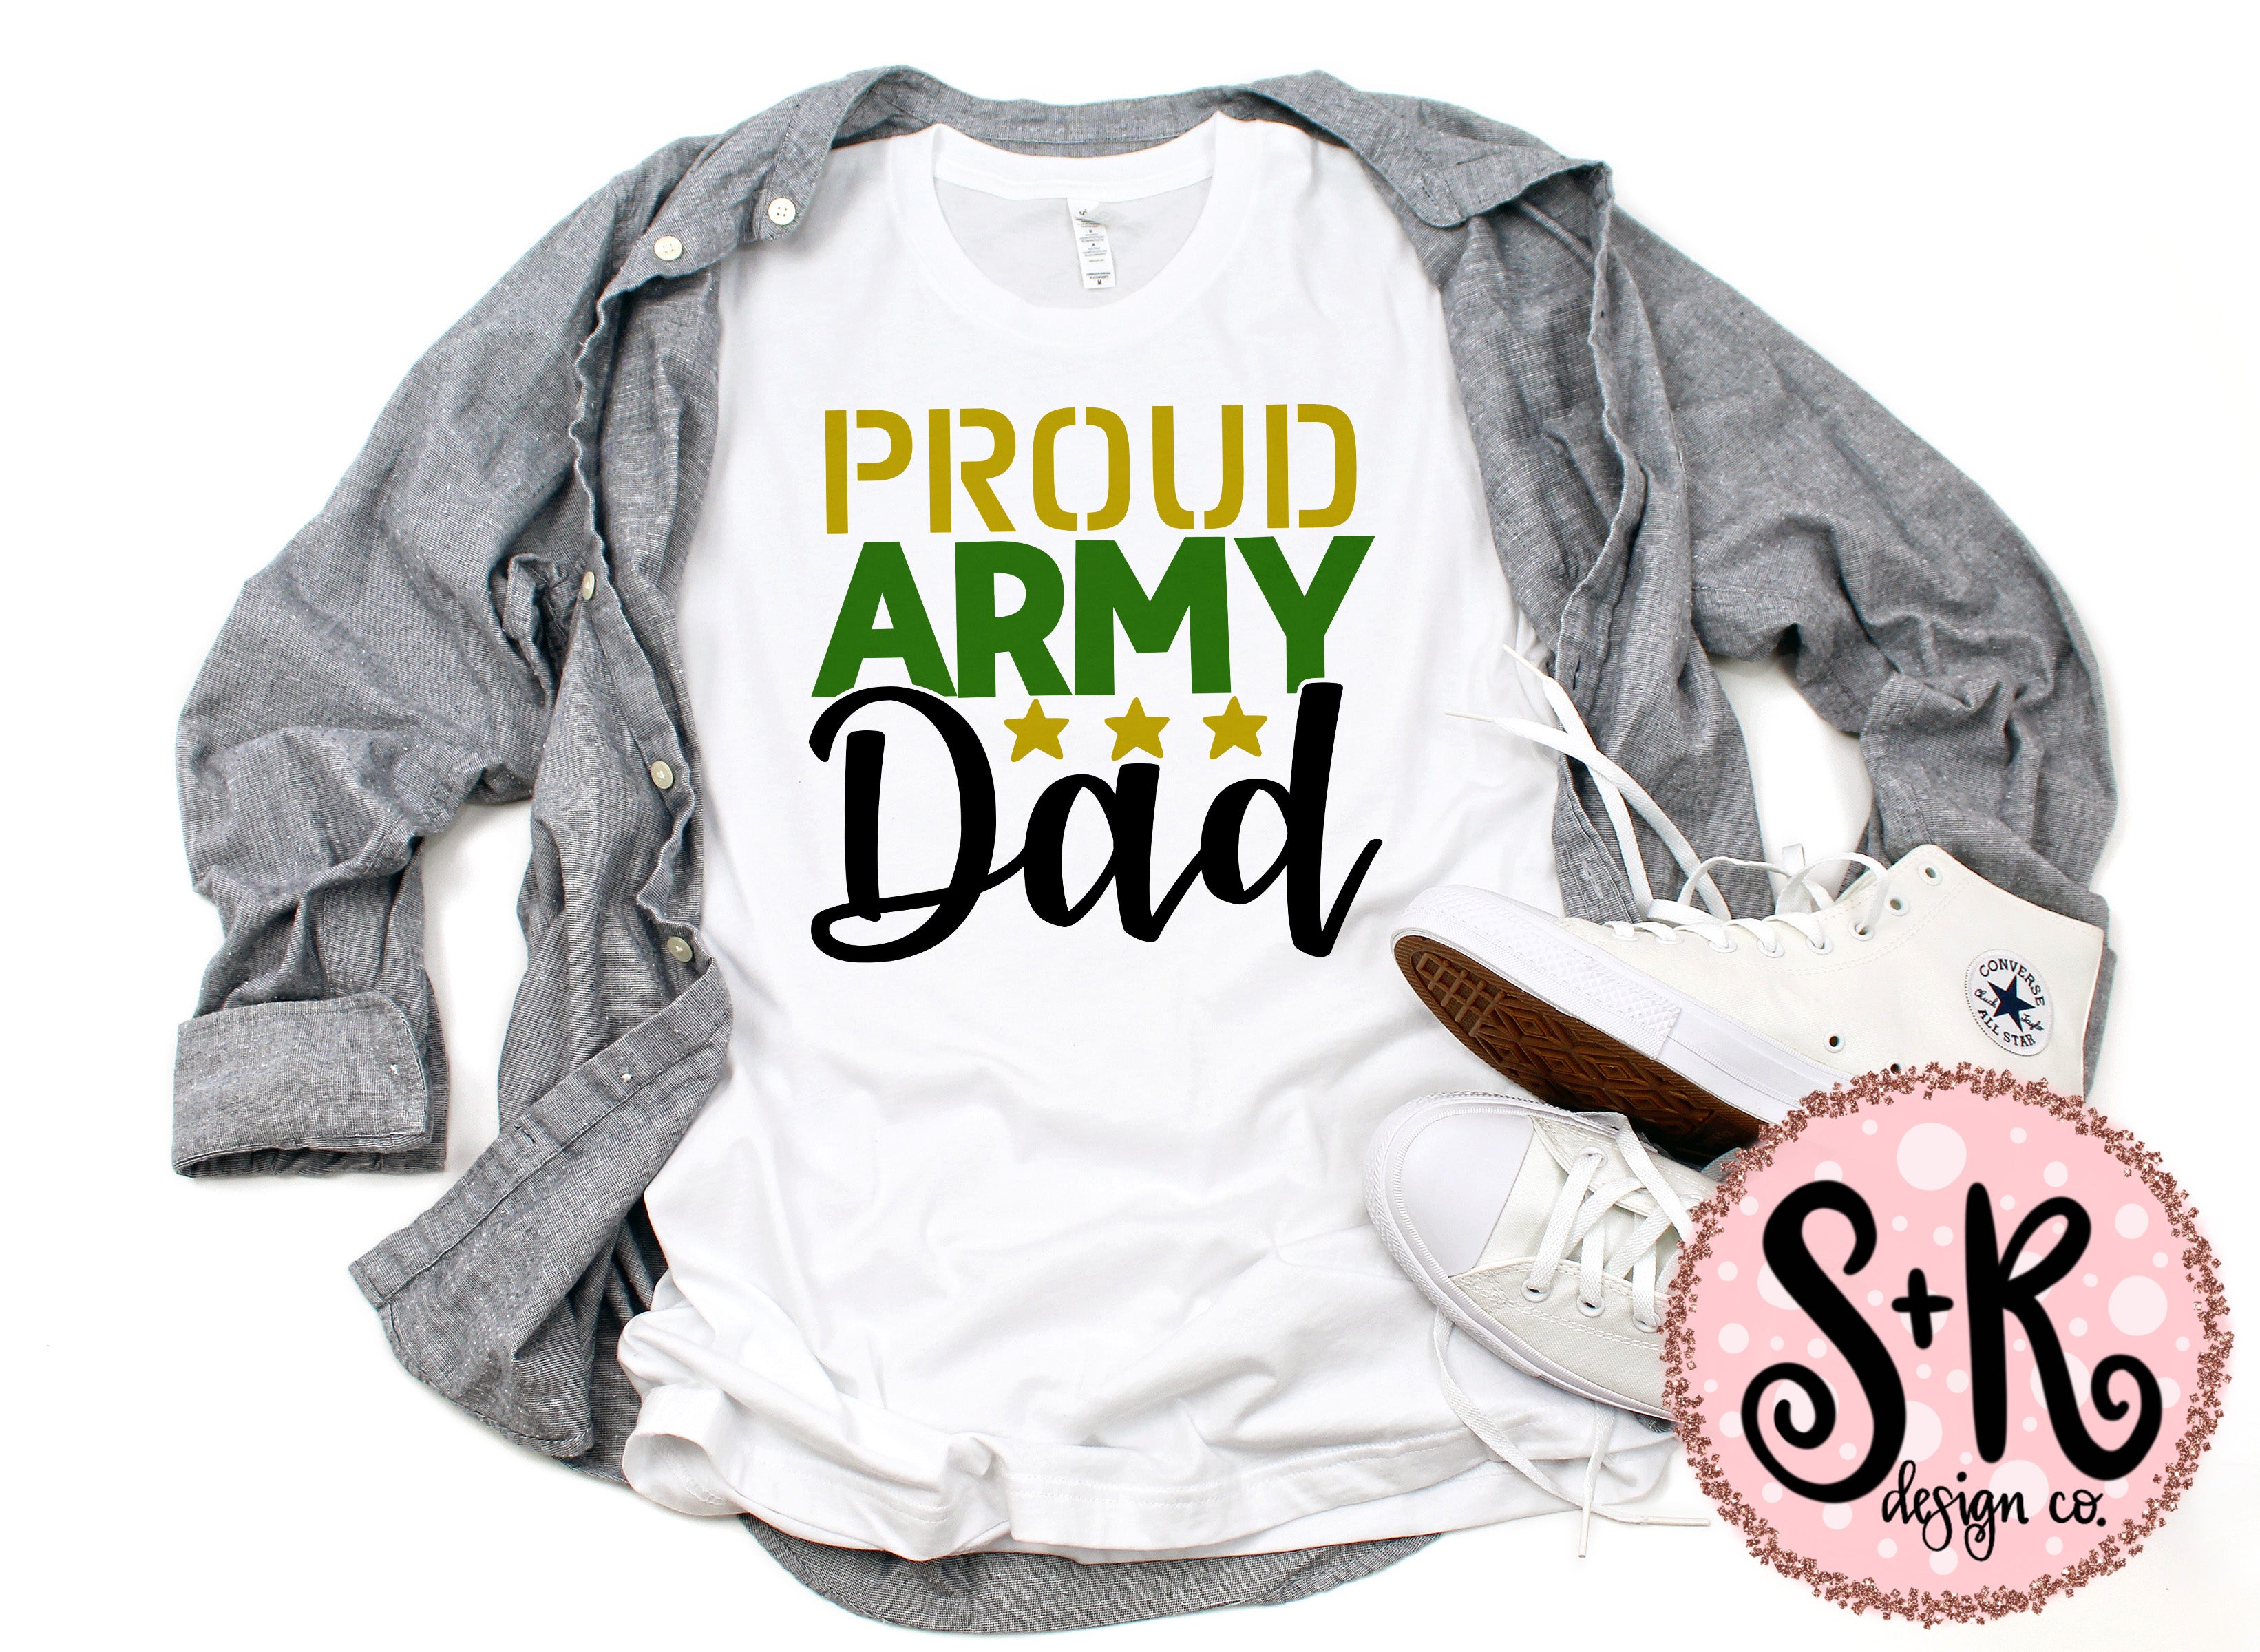 Download Proud Army Dad Svg Dxf Png 2019 Scout And Rose Design Co